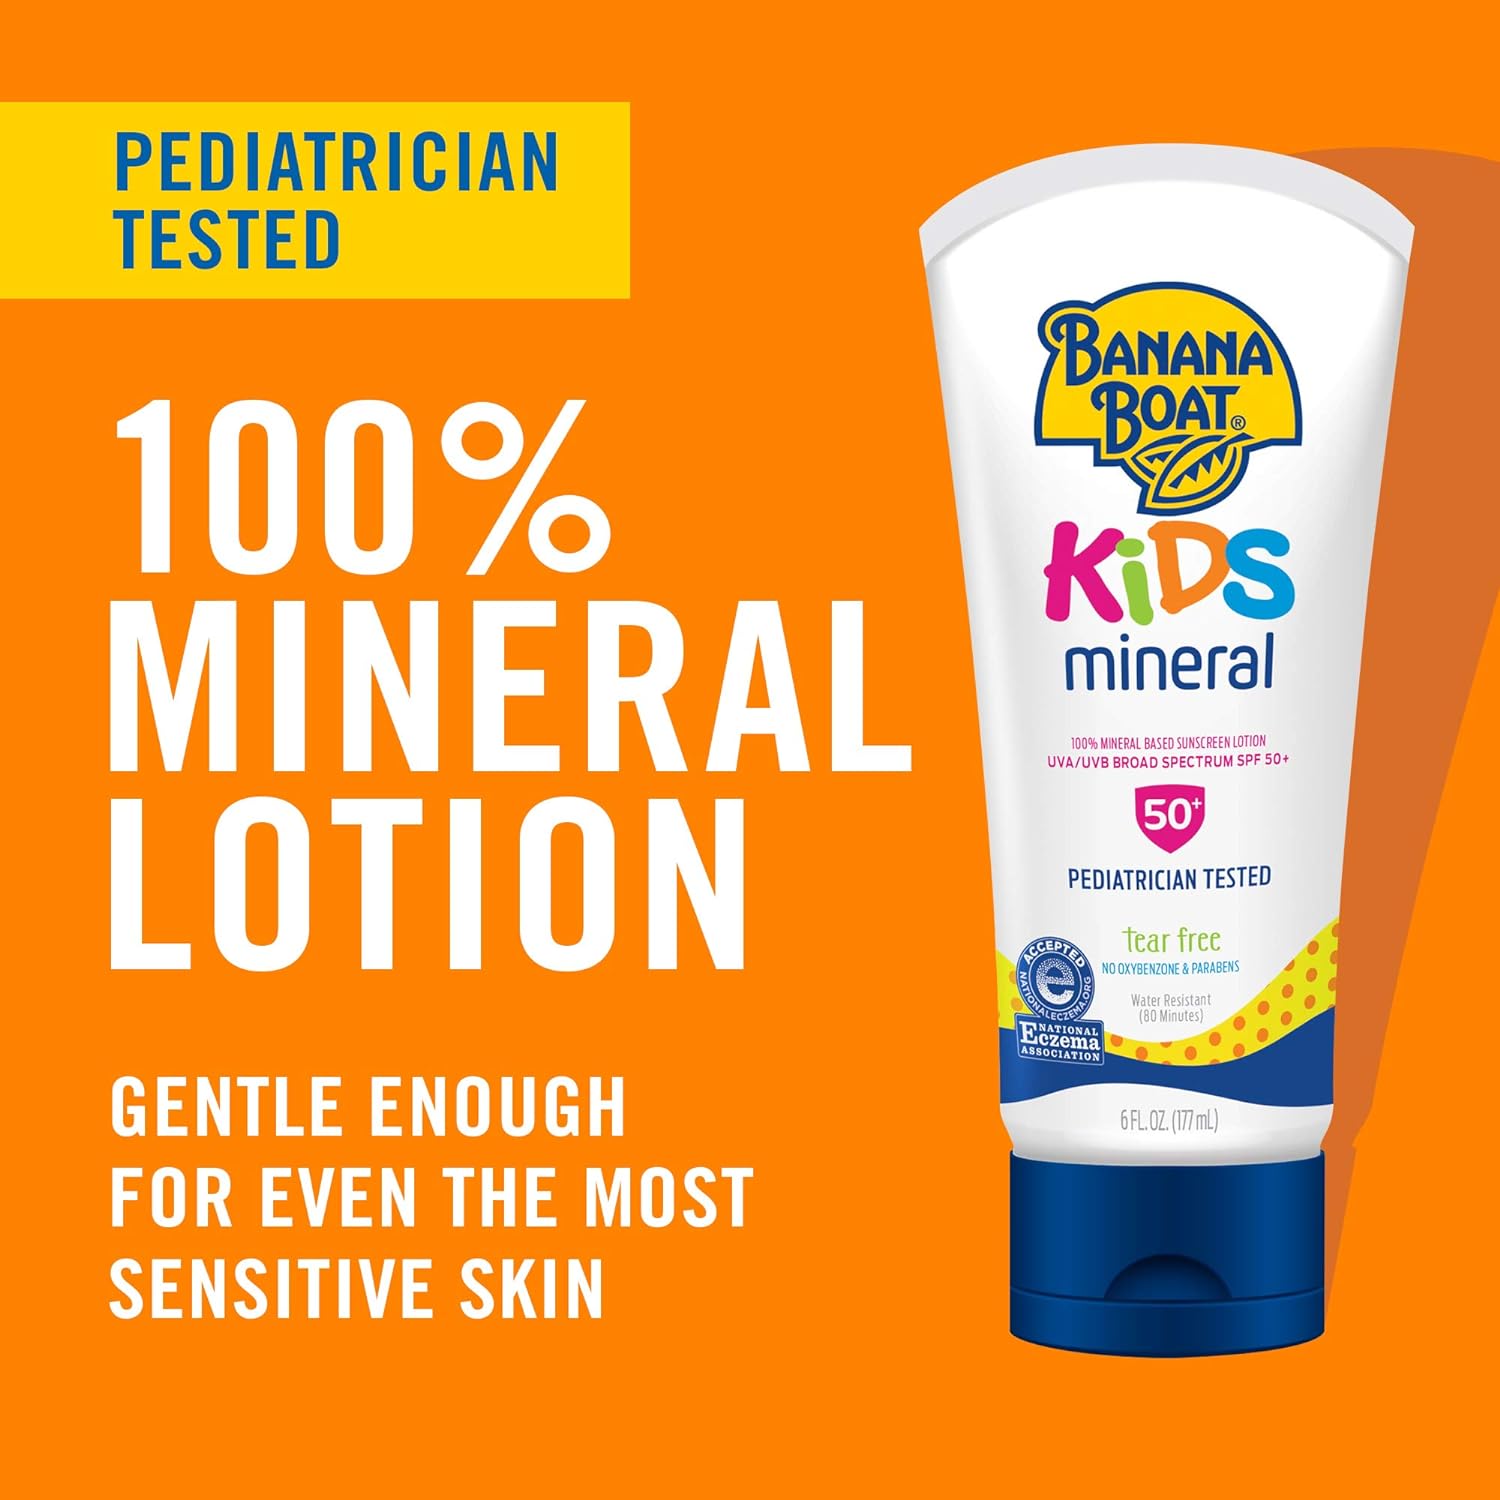 Banana Boat Kids 100% Mineral Sunscreen Lotion SPF 50 Twin Pack | Sunscreen for Kids, Childrens Sunscreen, Kids Sunblock, Banana Boat Mineral Sunscreen, Oxybenzone Free Sunscreen SPF 50, 6oz each : Beauty & Personal Care